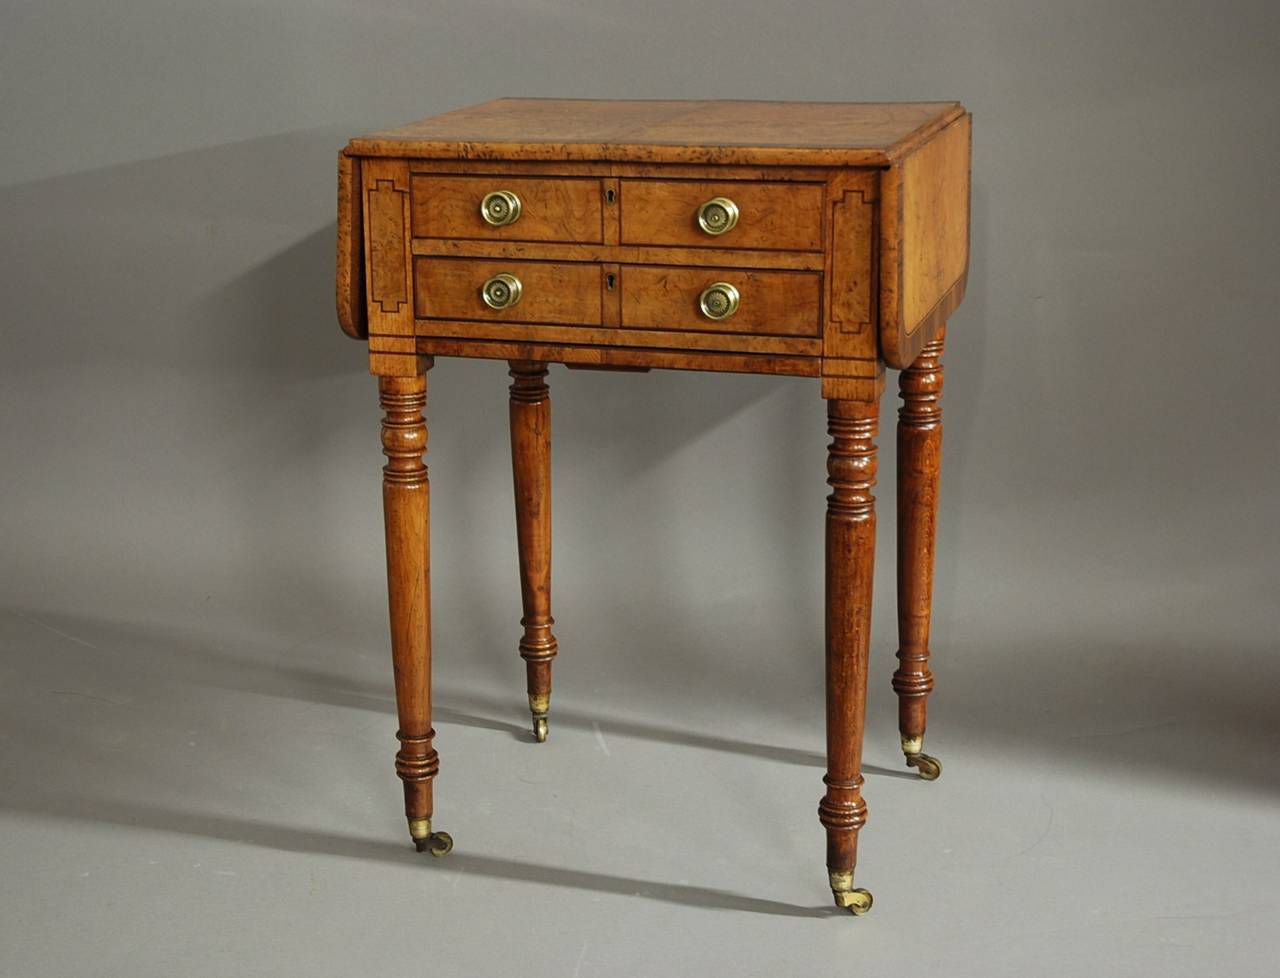 An early 19th century burr oak freestanding work table in the pembroke style of superb patina (color) and good proportions.

The top consists of four Fine quality burr oak panels with mahogany and boxwood stringing, banding and a burr oak